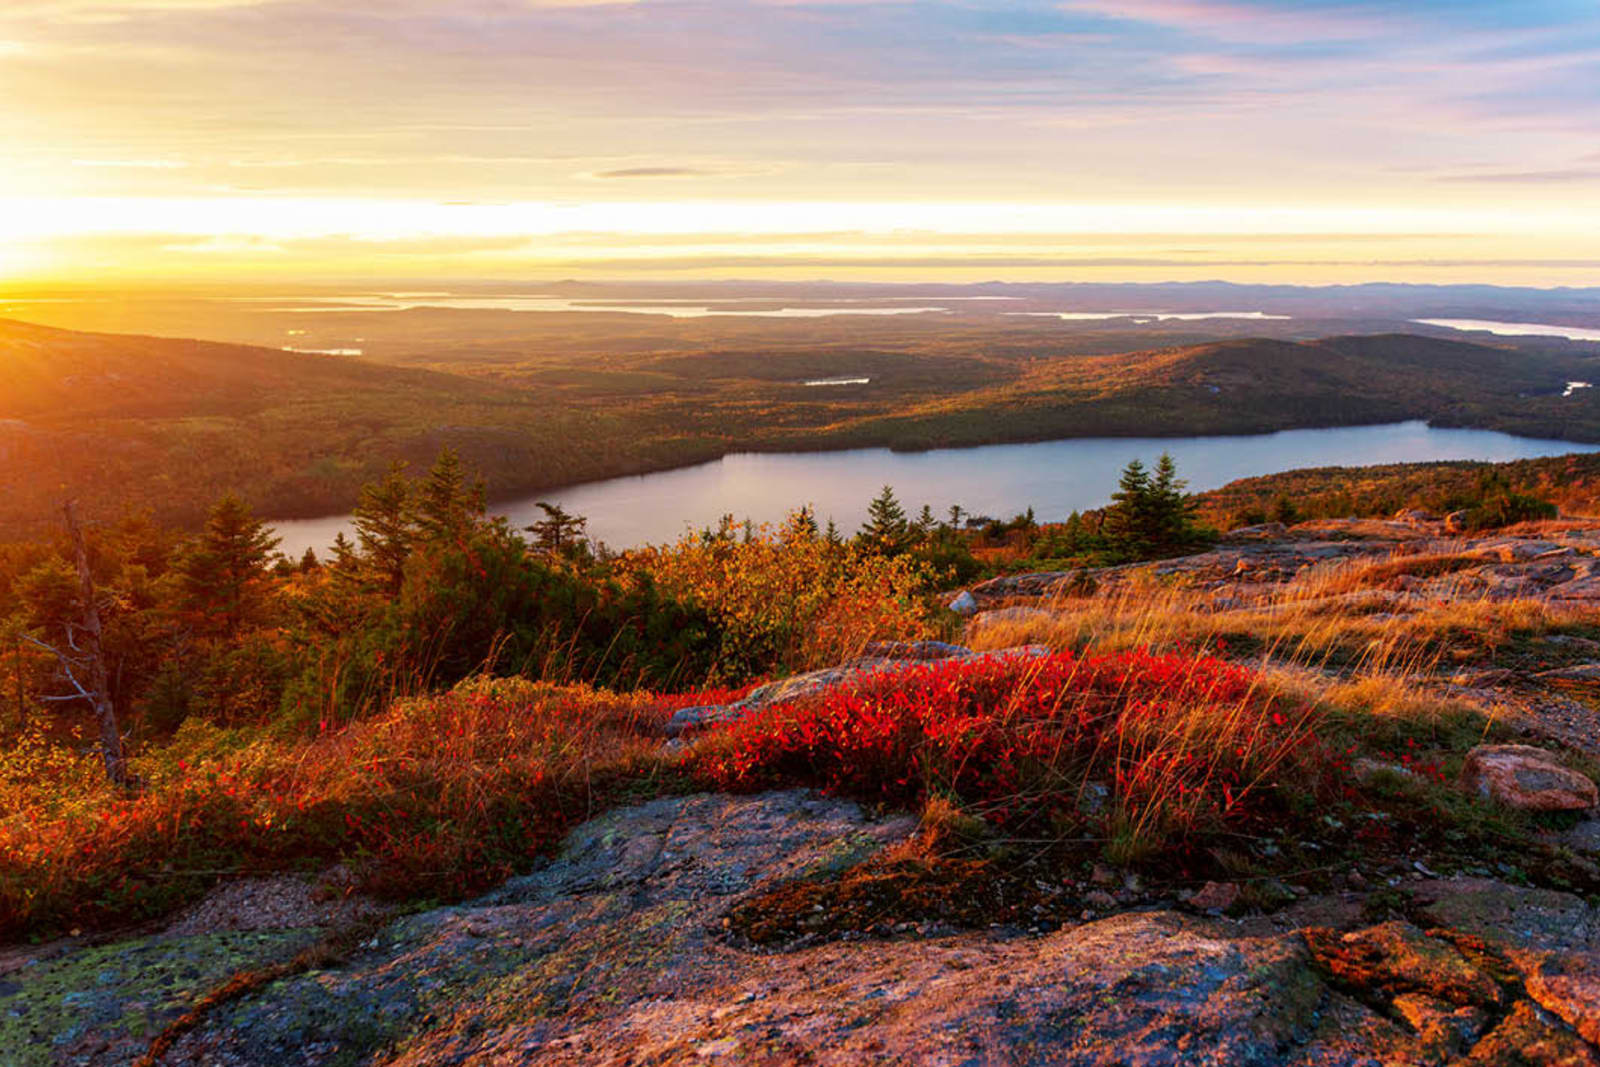 Acadia National Park in Maine, USA